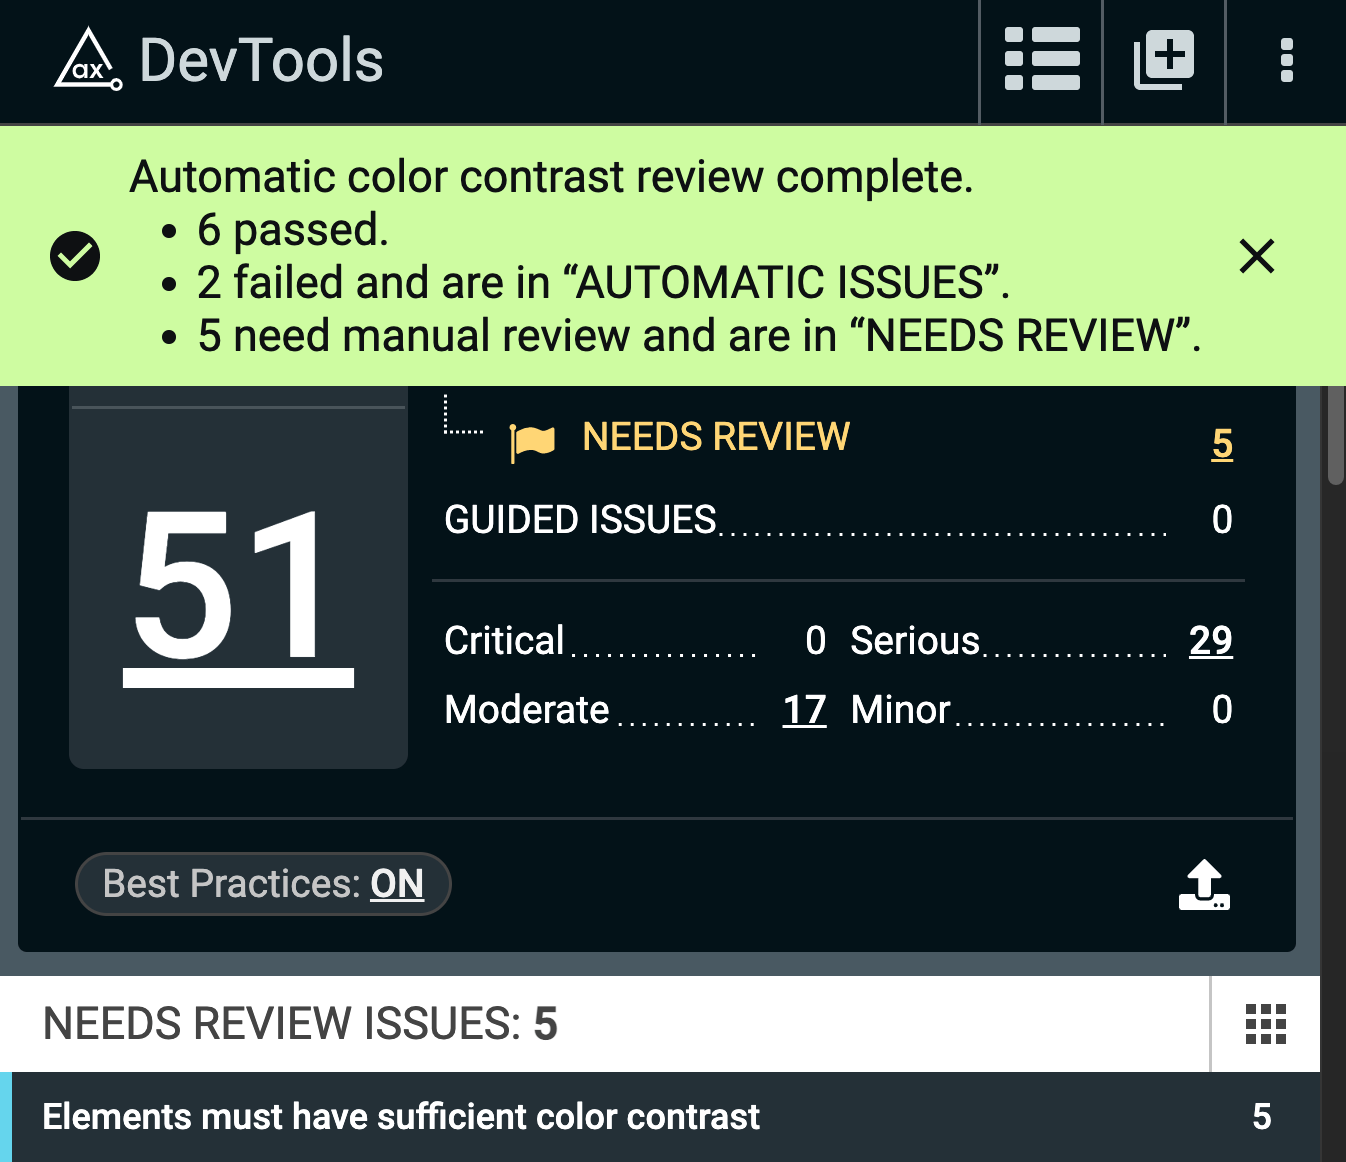 Screenshot of the axe DevTools extension displaying the Results received after running the Color Contrast Analyzer: "Automatic color contrast review complete. 6 passed, 2 failed and are in 'AUTOMATIC ISSUES', and 5 need manual review and are in "NEEDS REVIEW".